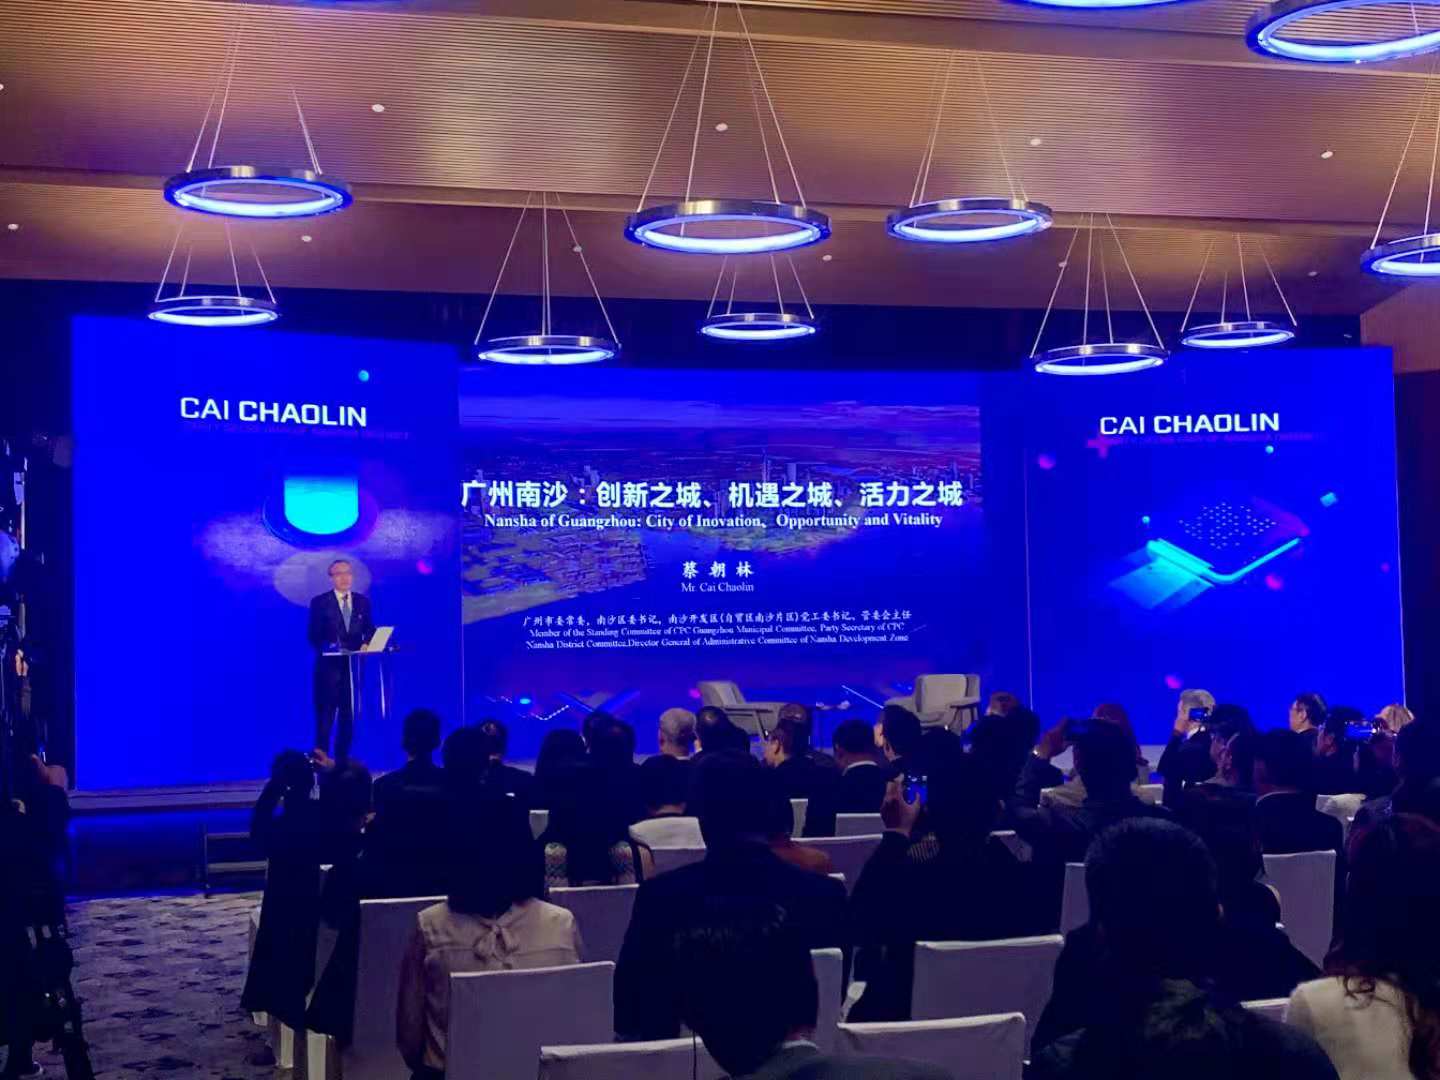 Cai Chaolin, the party secretary of the Communist Party of China's Nansha committee, said the Greater Bay Area has the potential to become a major economic and business hub in the world. Nansha, situated in the heart of that region, is poised to benefit.